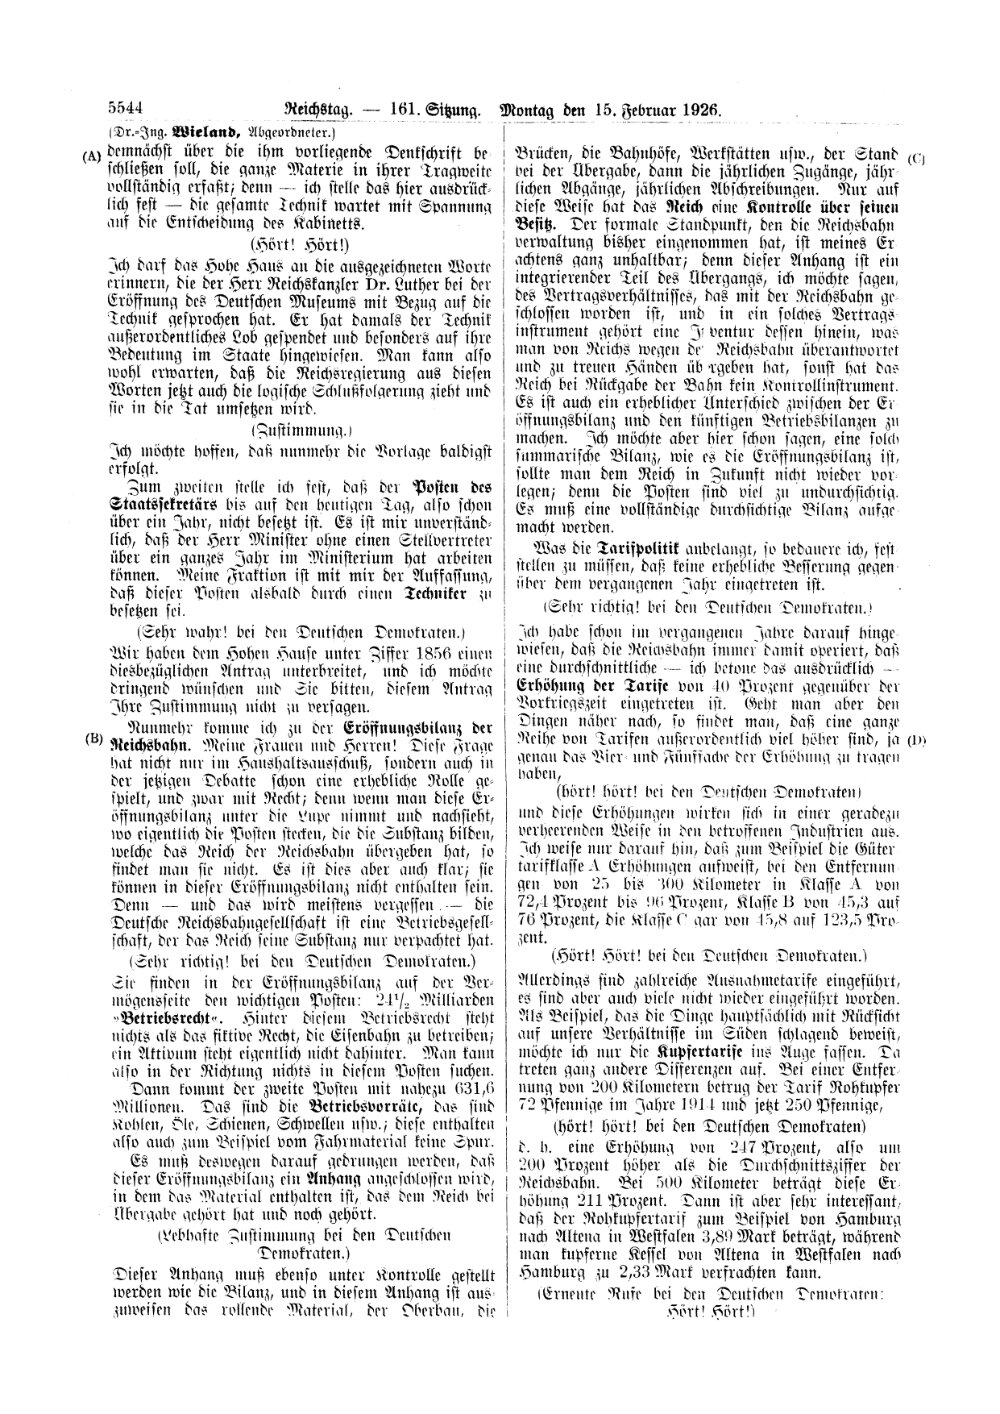 Scan of page 5544